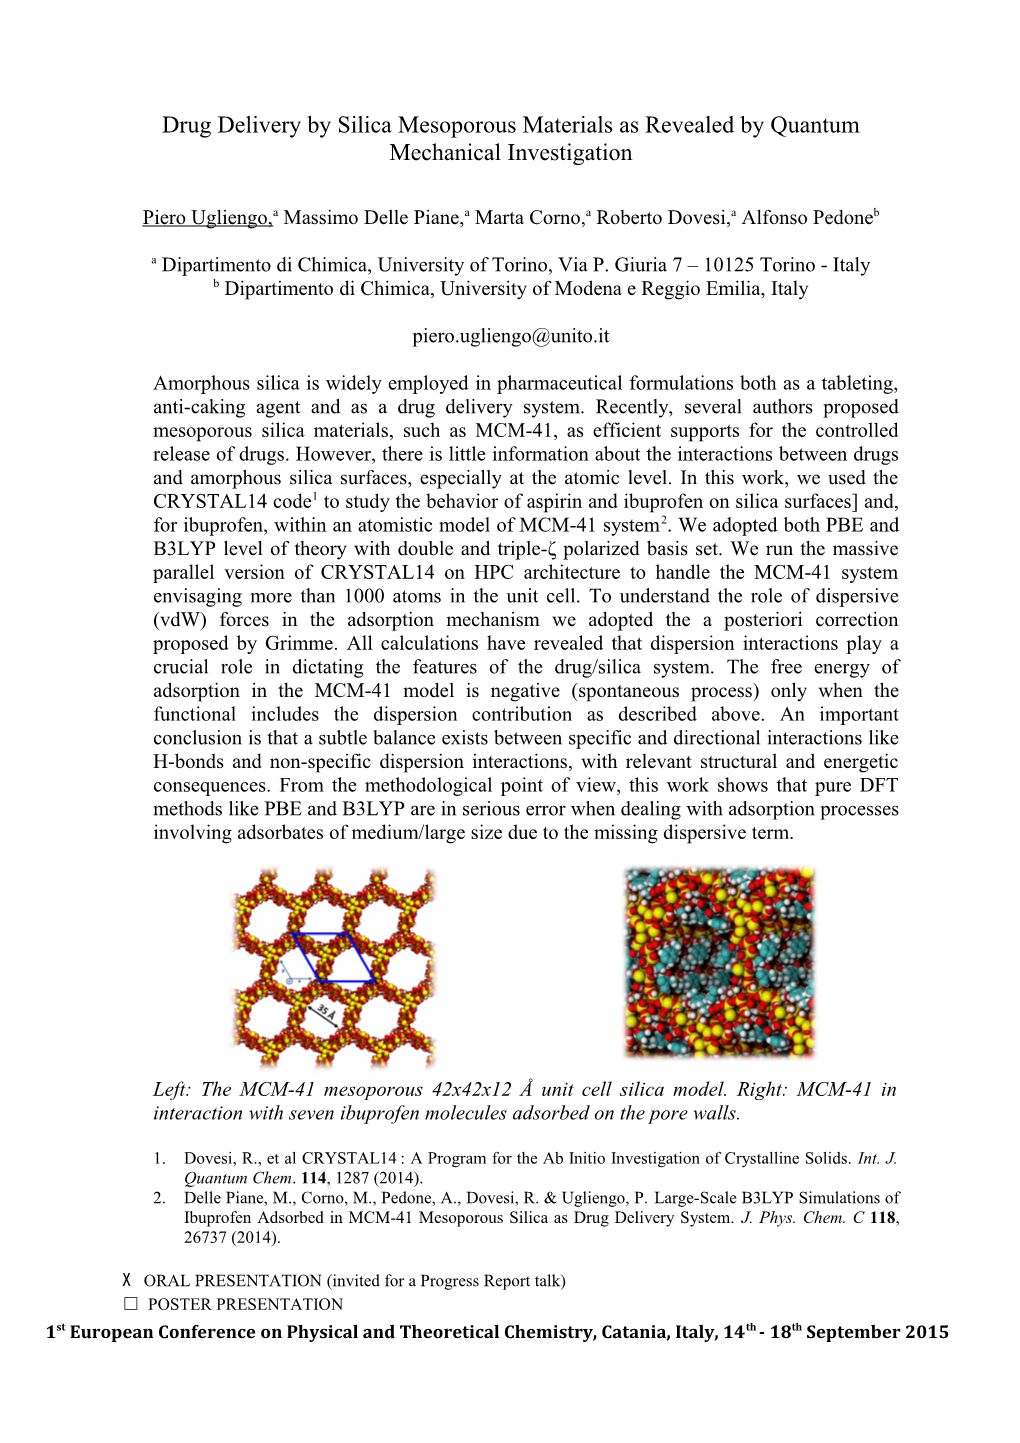 Drug Delivery by Silica Mesoporous Materials As Revealed by Quantum Mechanical Investigation